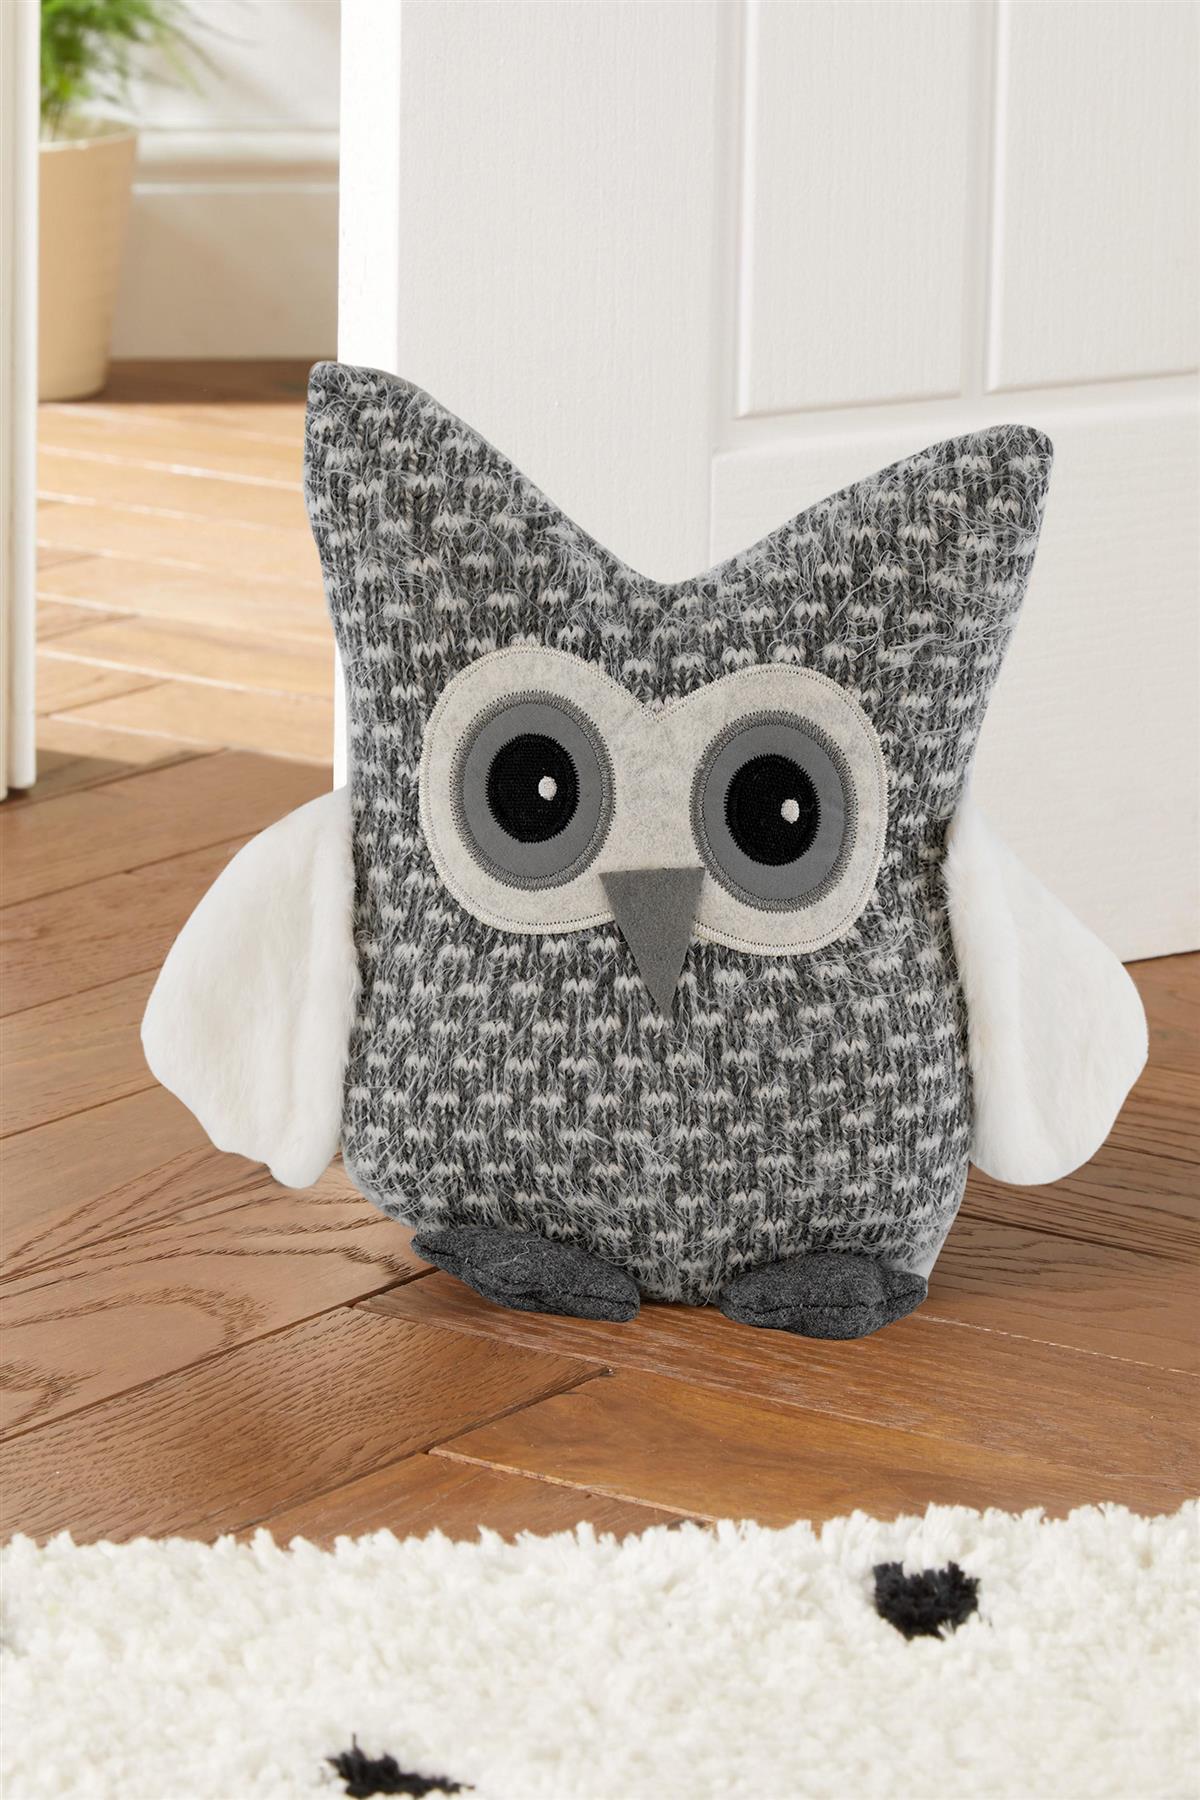 Owl Door Stopper by The Magic Toy Shop - The Magic Toy Shop